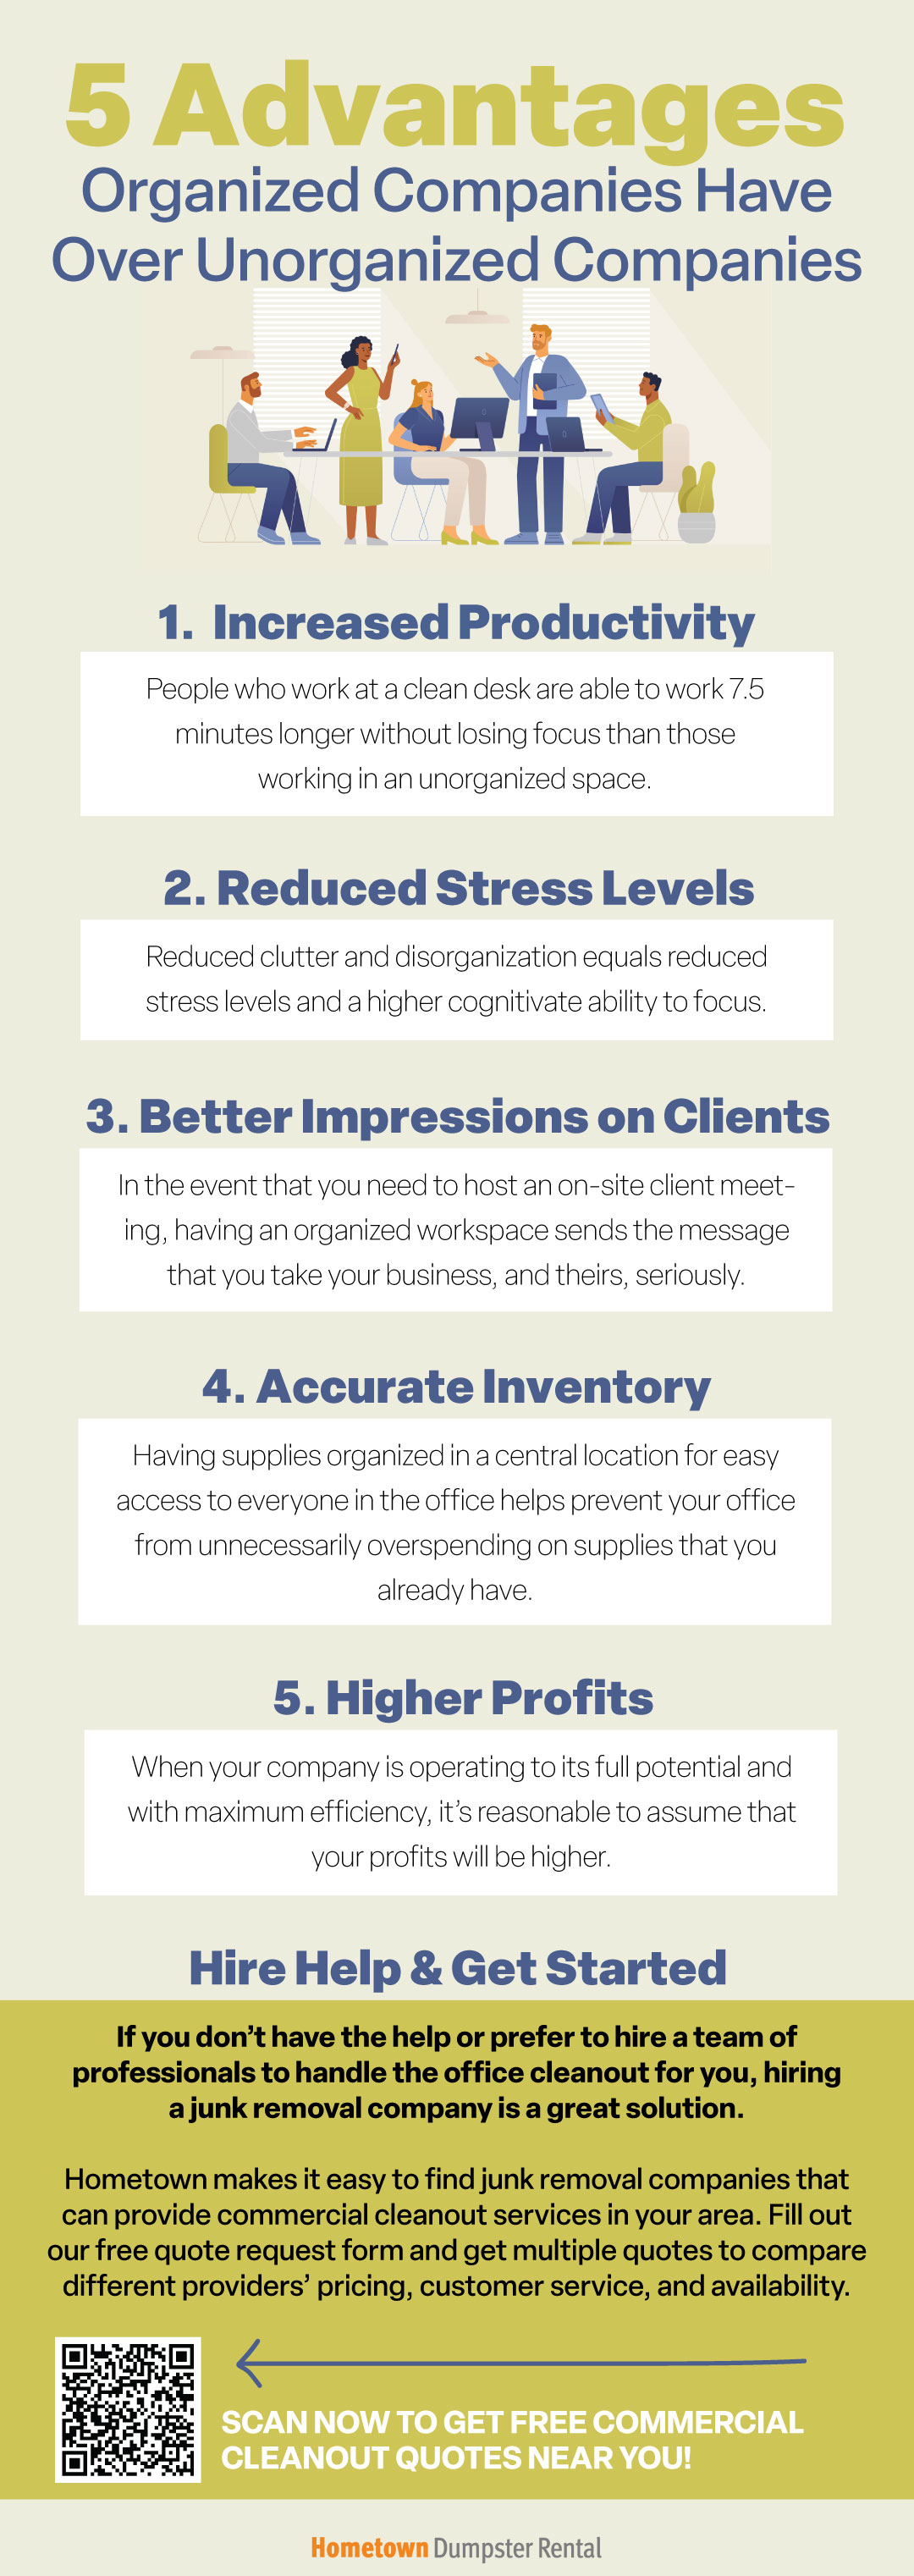 5 Advantages to Keeping an Organized Company Office Infographic